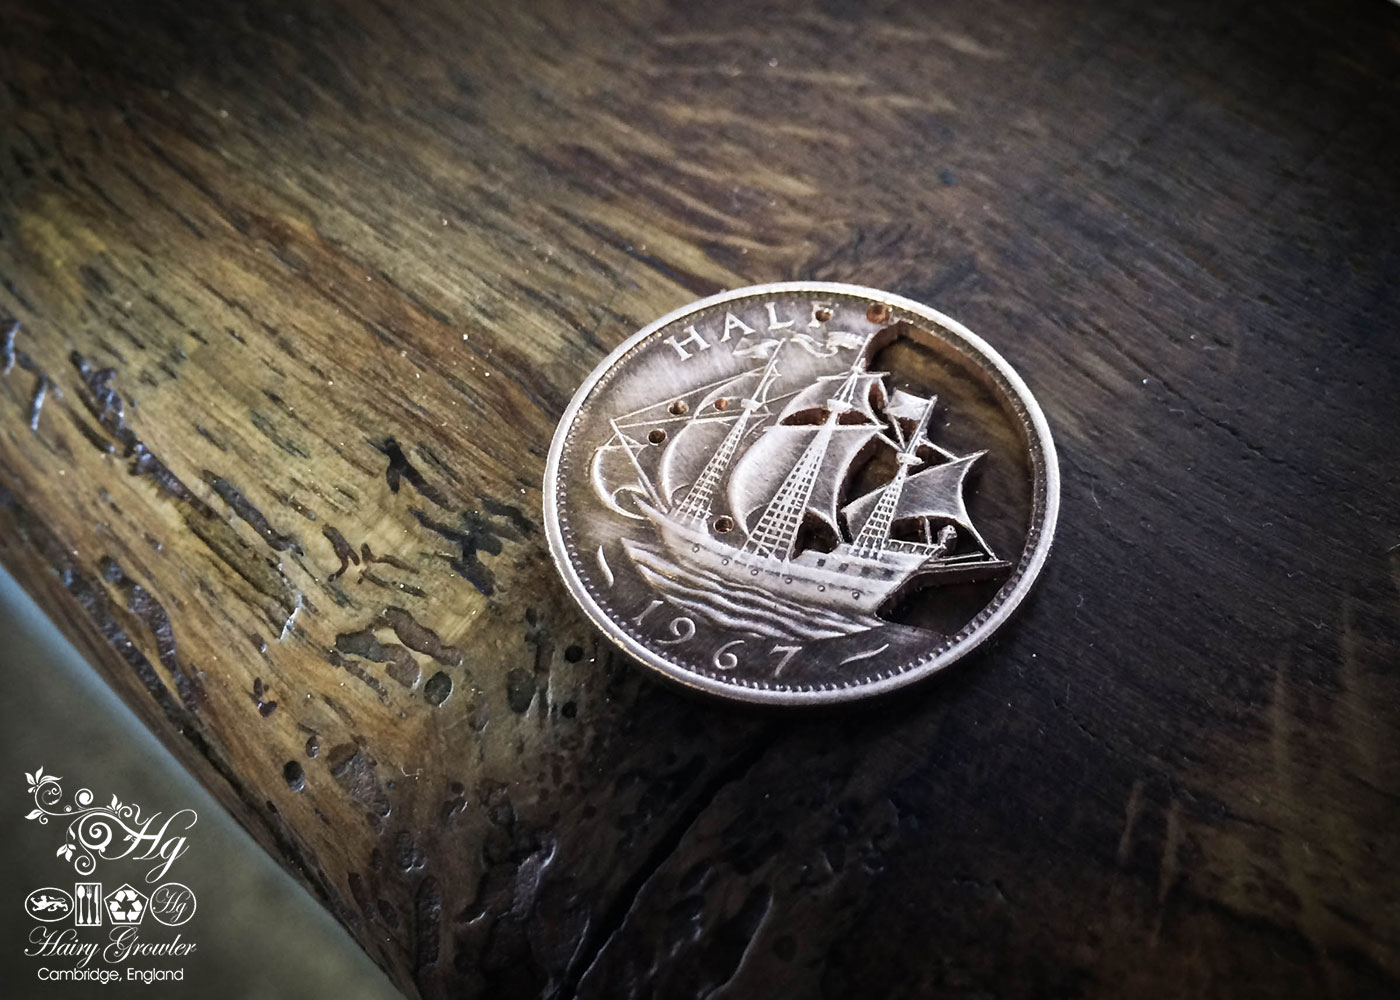 Handmade and upcycled Golden Hind ship coin pendant necklace